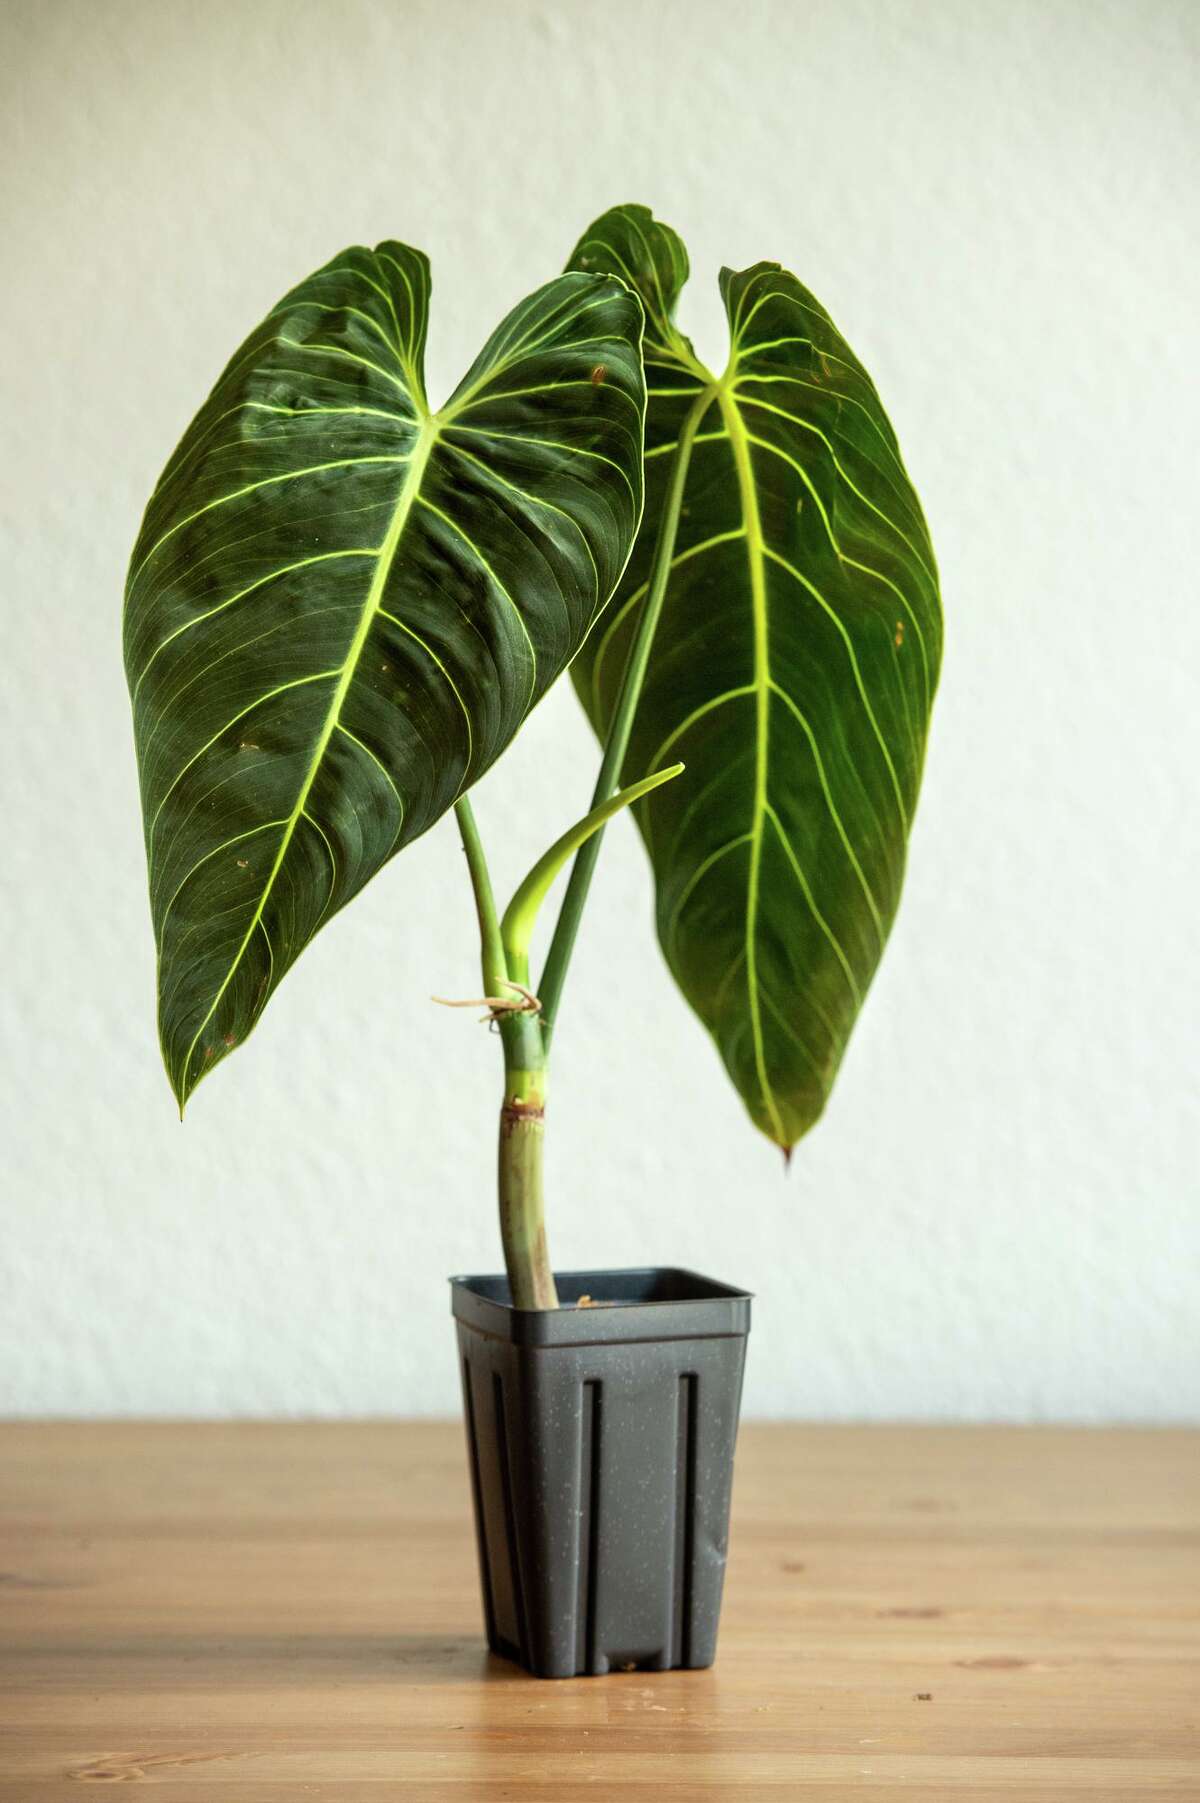 This is a Philodendron Melanochrysum is also known as the Black Golden Philodendron.